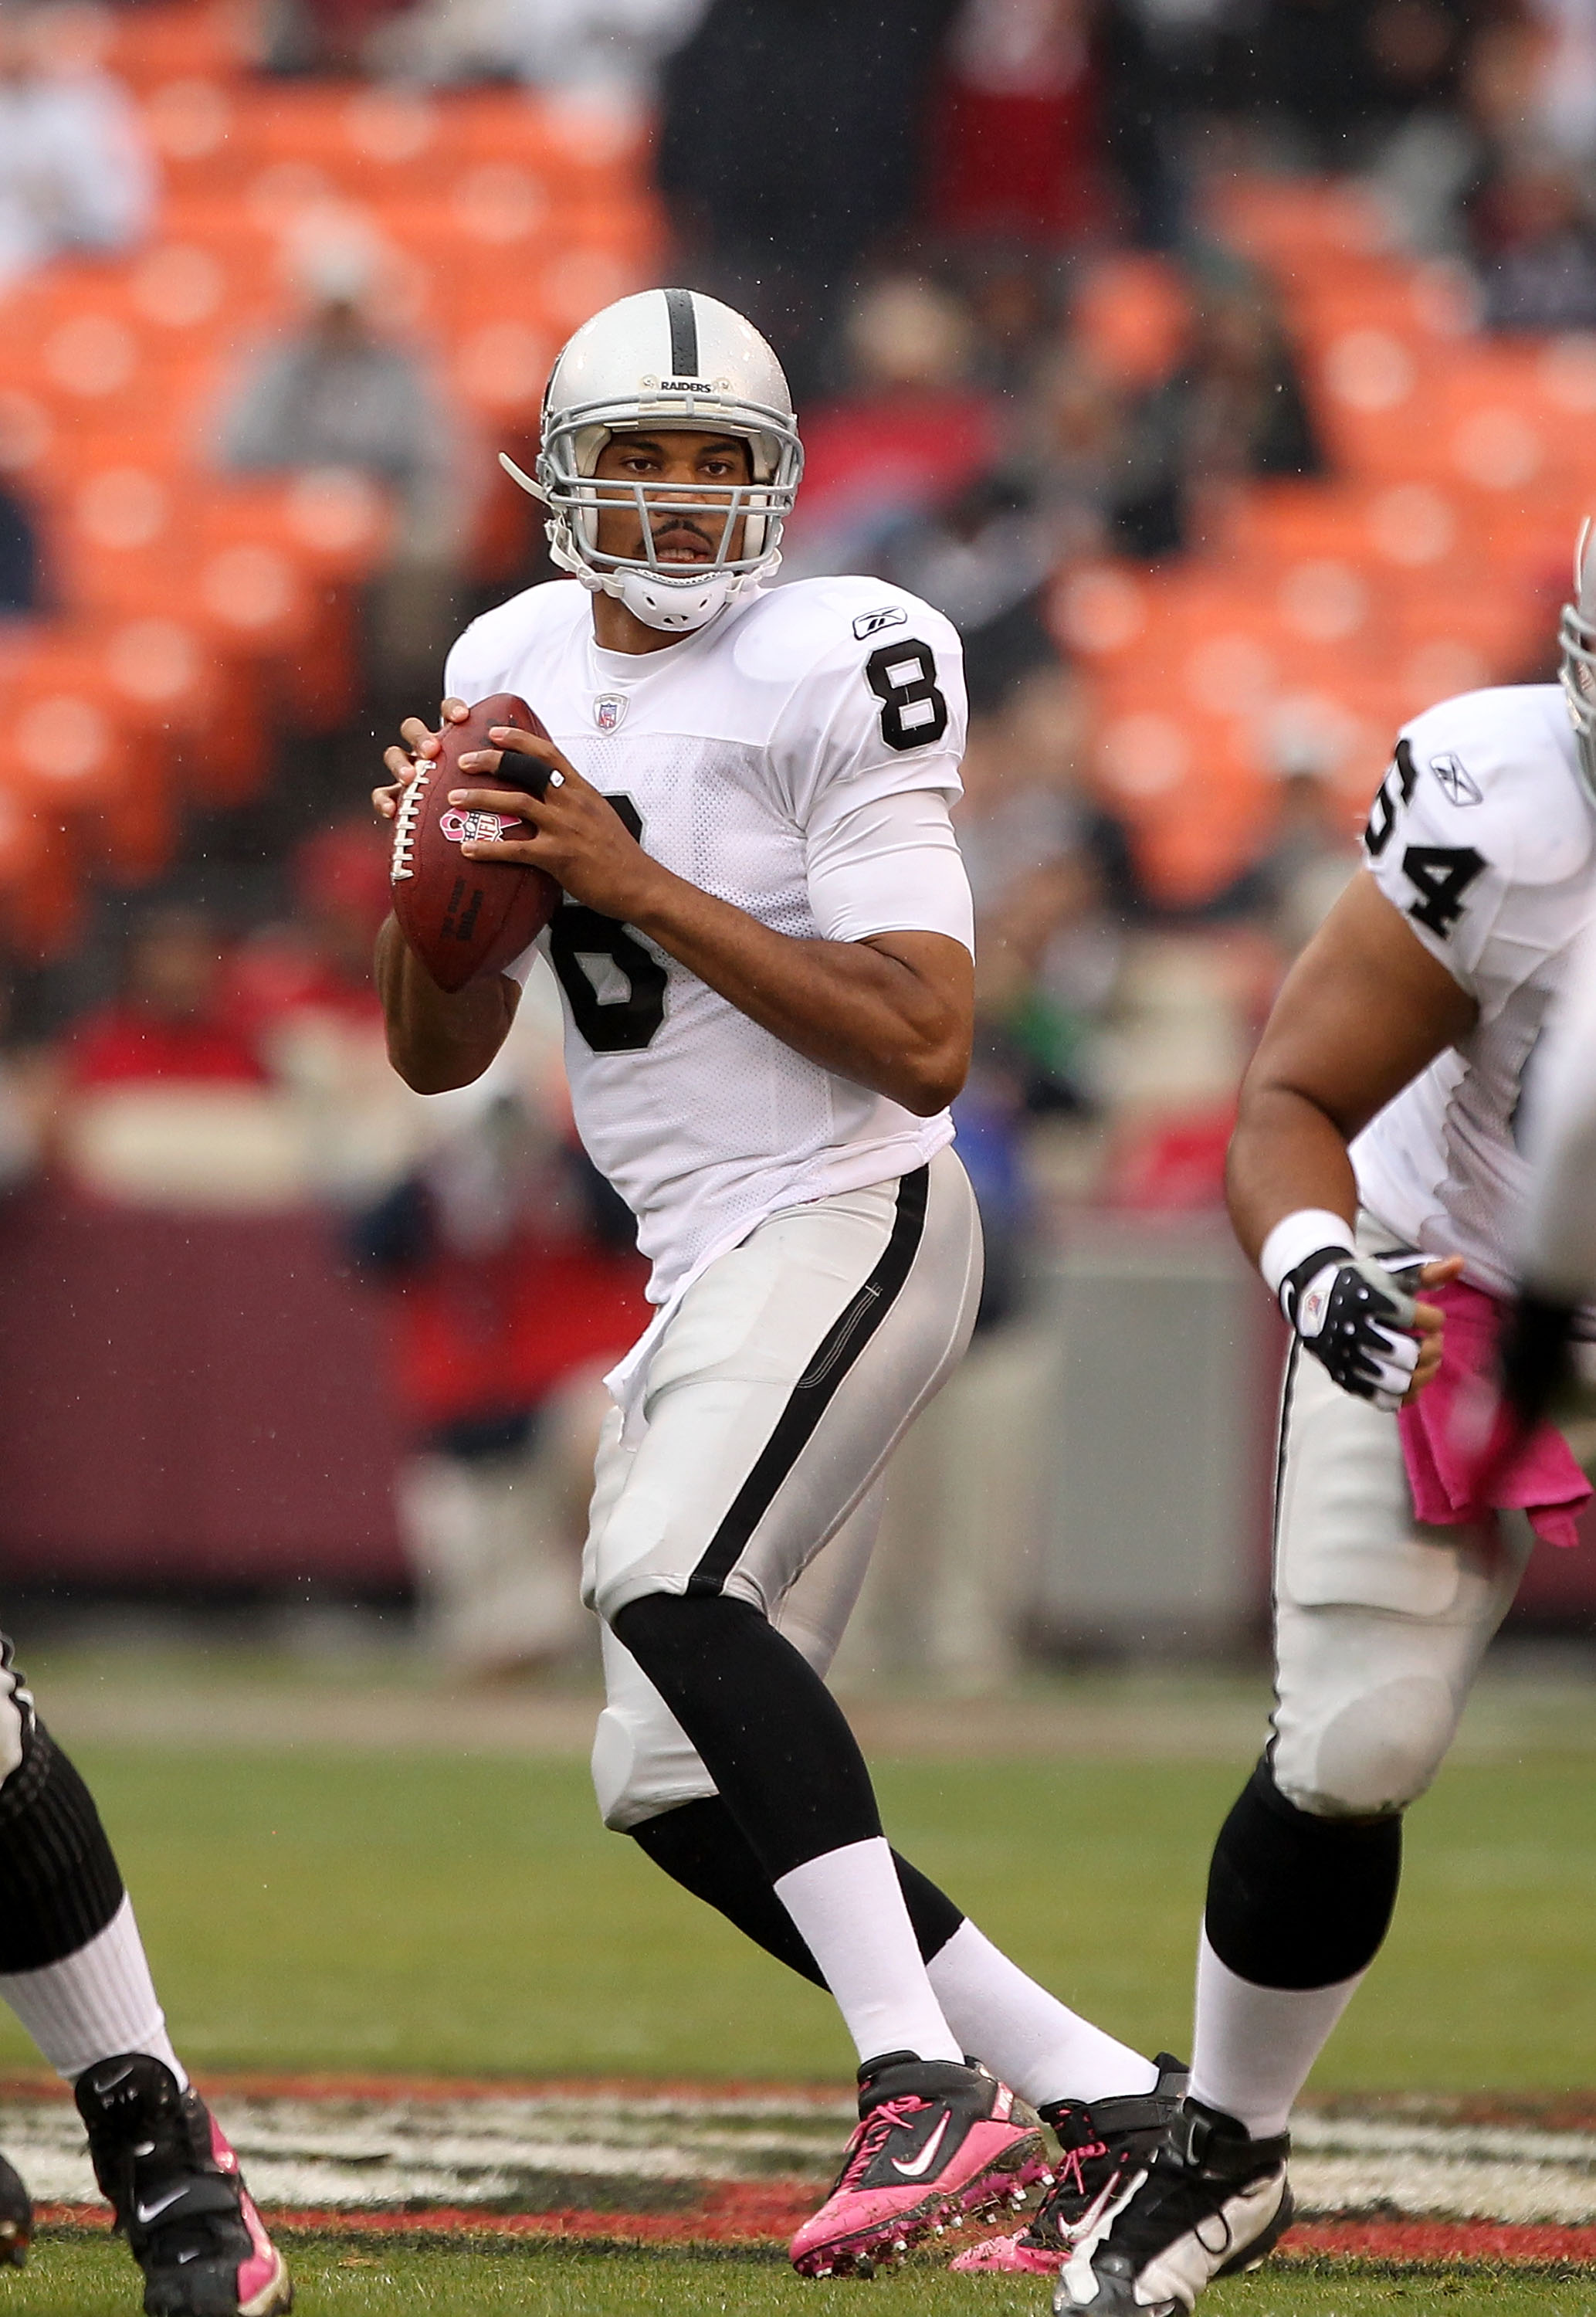 SAN FRANCISCO - OCTOBER 17:  Jason Campbell #8 of the Oakland Raiders in action against the San Francisco 49ers at Candlestick Park on October 17, 2010 in San Francisco, California.  (Photo by Ezra Shaw/Getty Images)